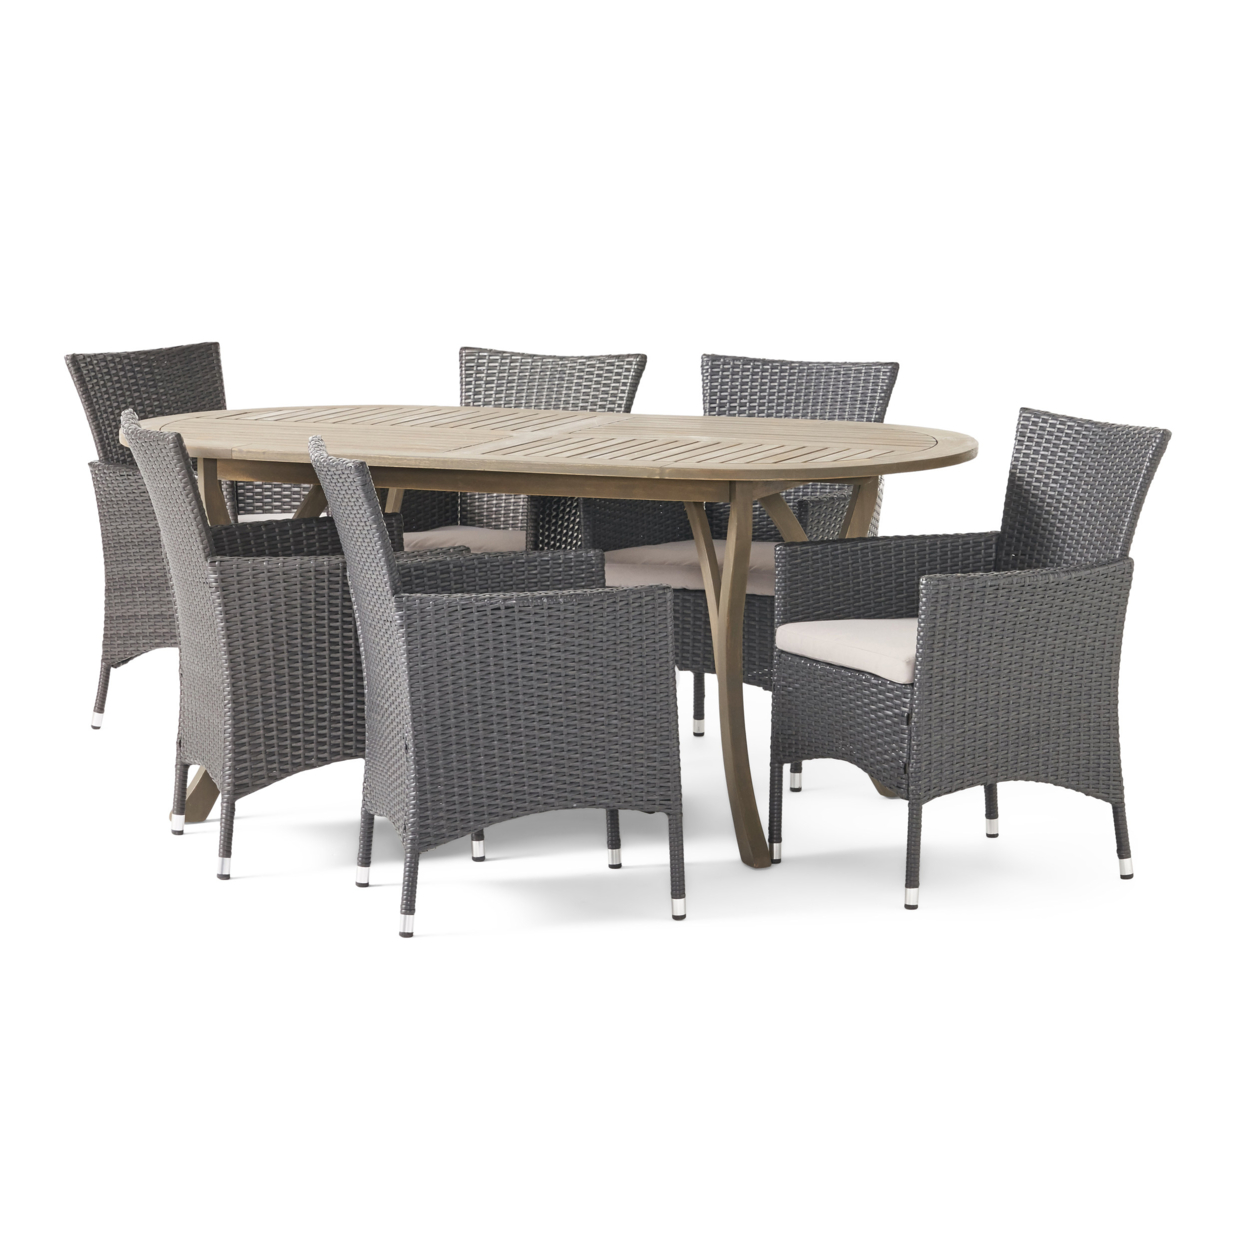 Dahl Outdoor 7 Piece Wood And Wicker Dining Set, Gray Finish And Gray